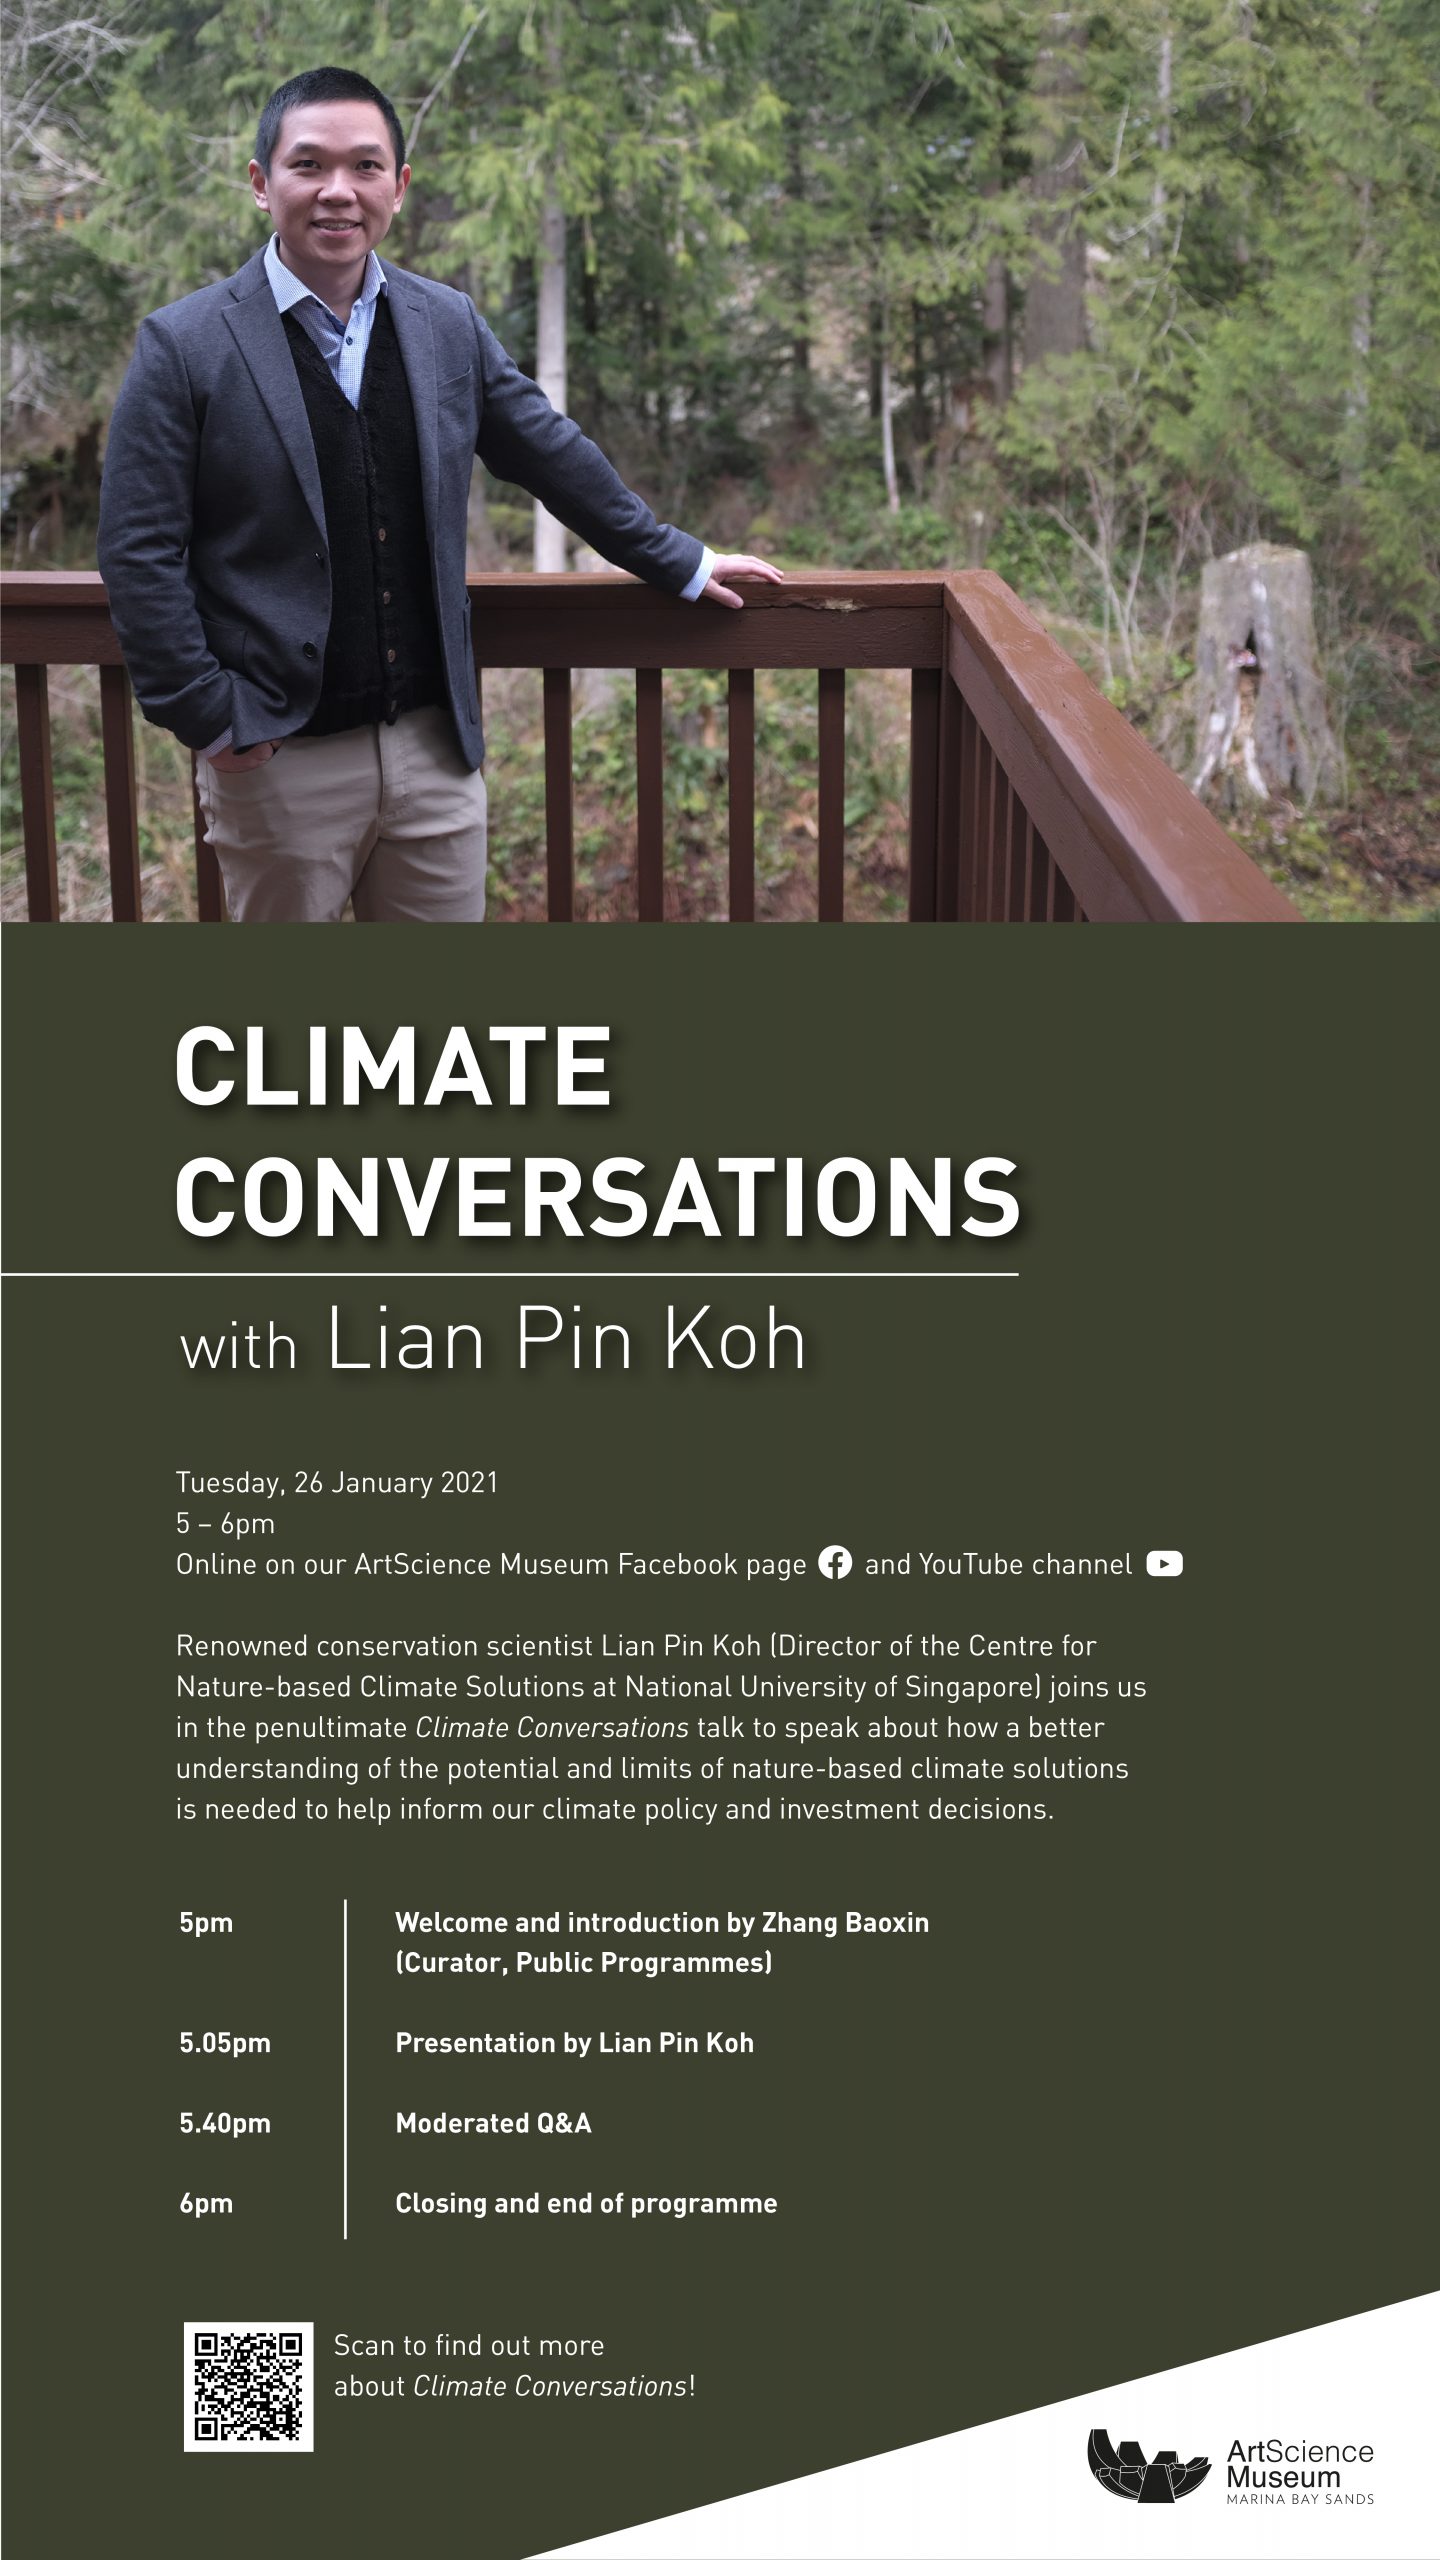 201202 Climate Conversations Lian Pin Koh POSTER